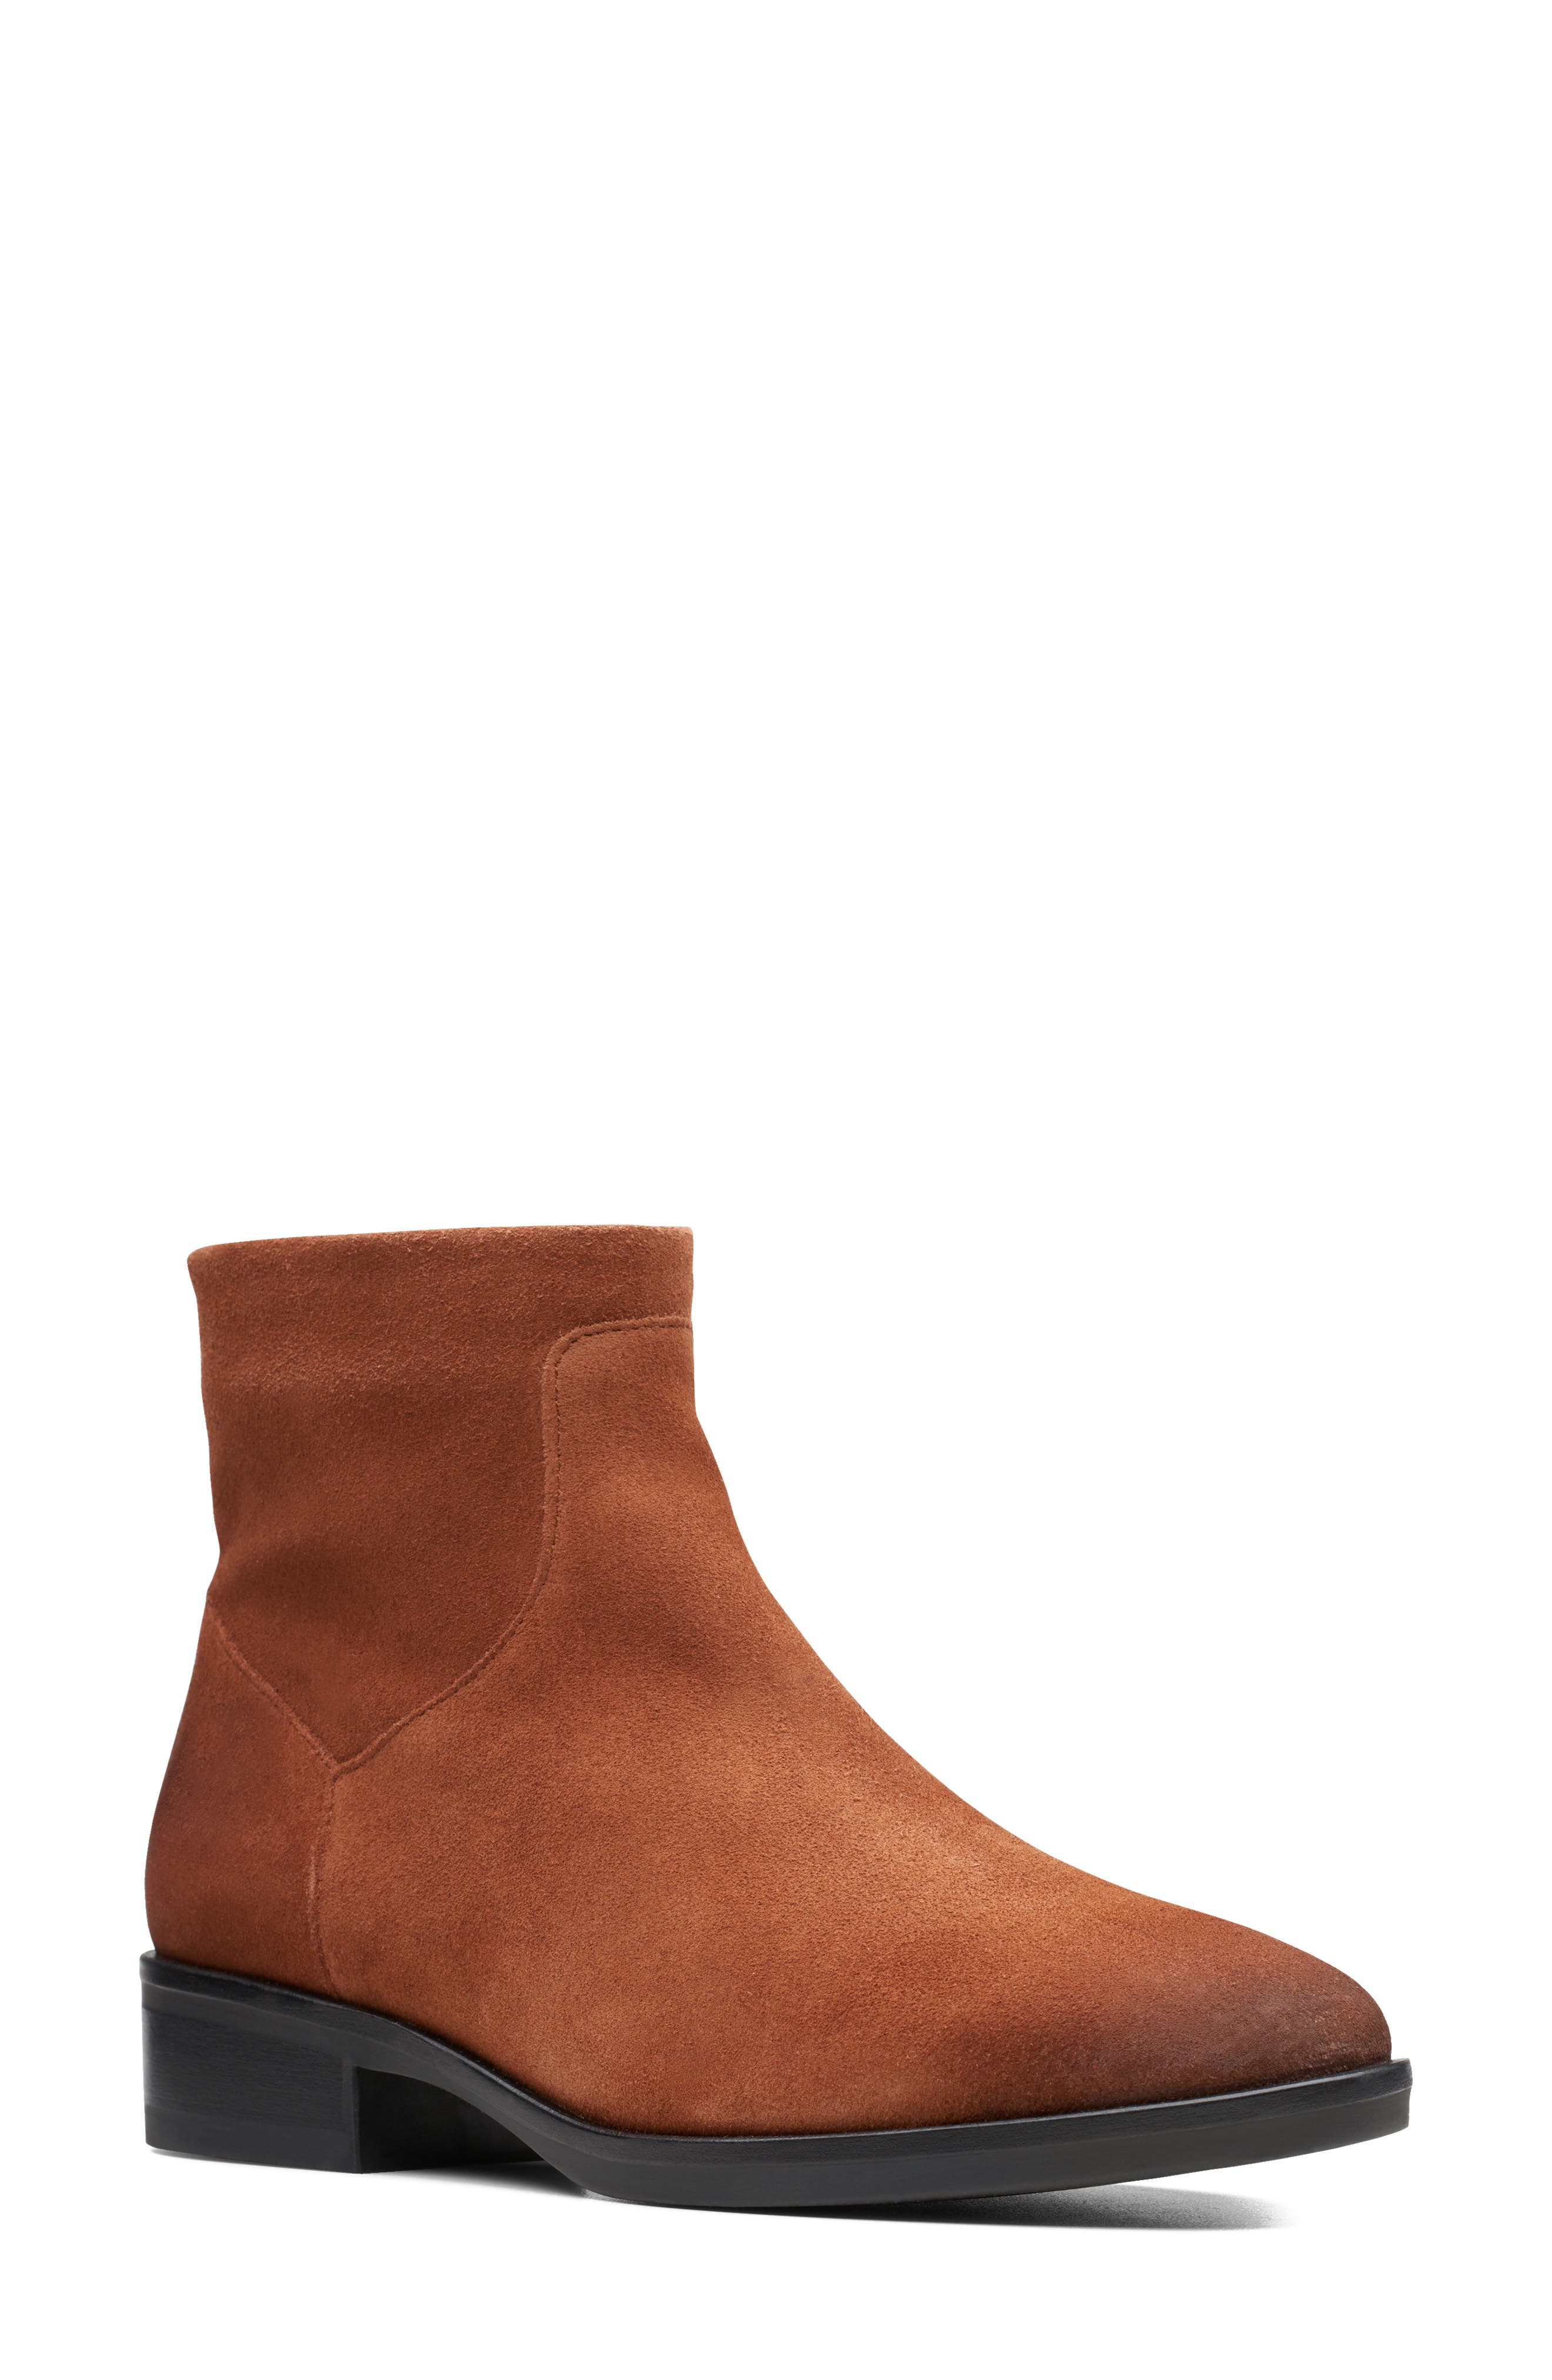 clarks pure rosa boots